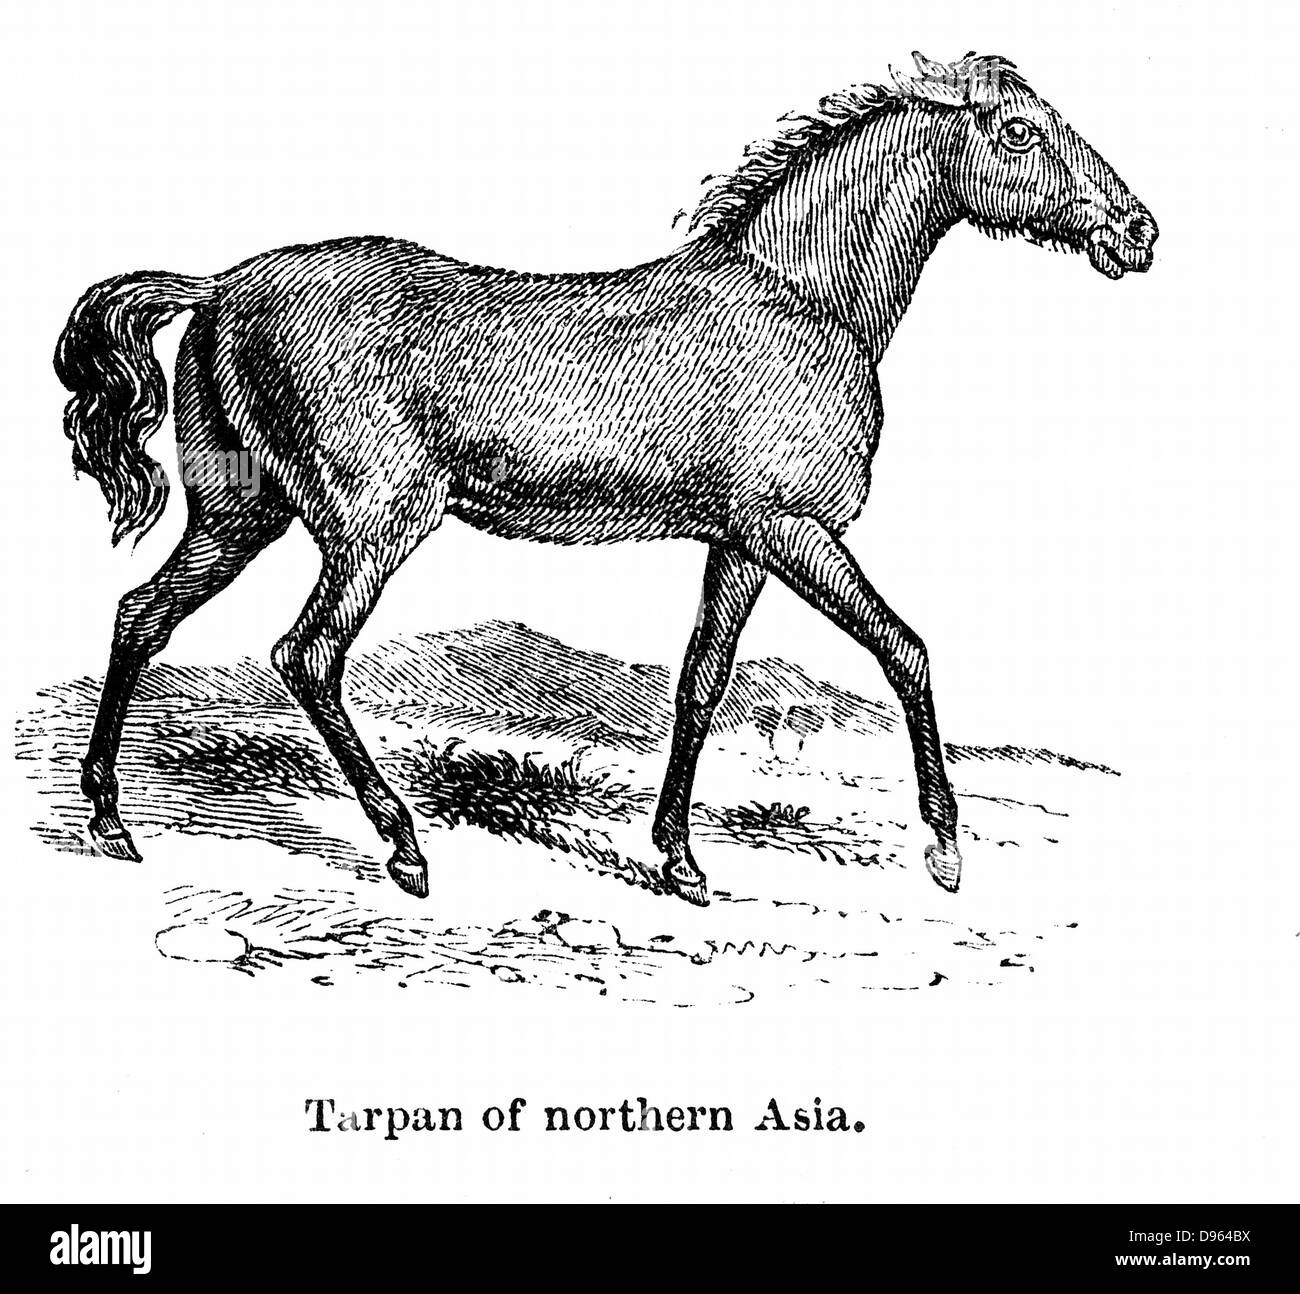 Tarpan, prehistoric wild horse of which died out in the late 1800s.  Modern genetic creation made in 1930s using breeds of pony with Tarpan ancestry.  Wood engraving 1850. Stock Photo